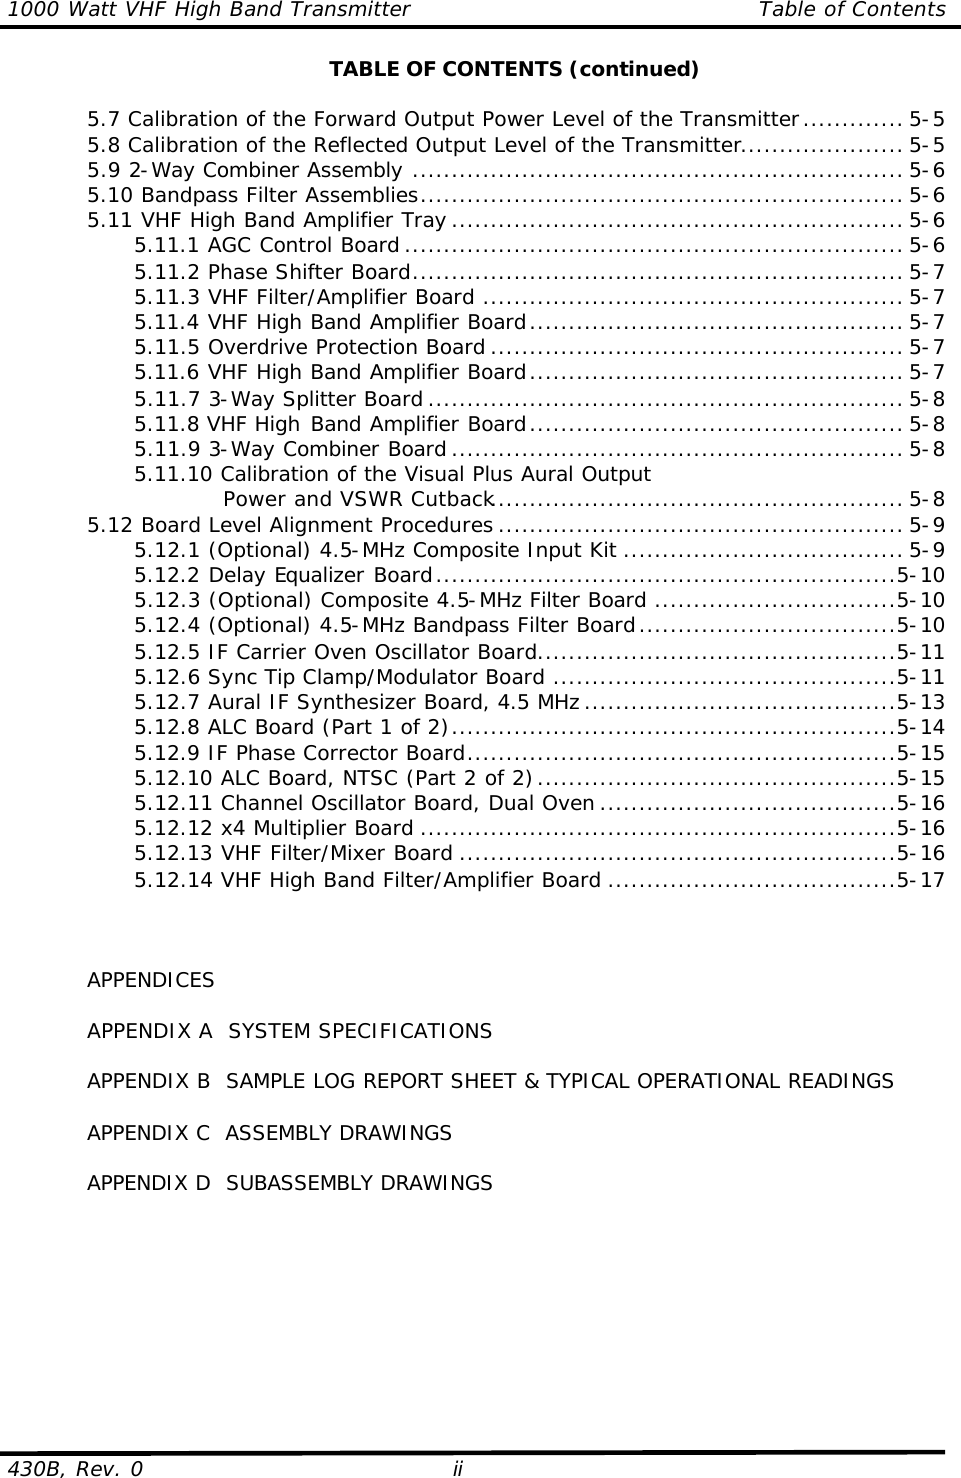 1000 Watt VHF High Band Transmitter Table of Contents  430B, Rev. 0 ii  TABLE OF CONTENTS (continued)   5.7 Calibration of the Forward Output Power Level of the Transmitter............. 5-5  5.8 Calibration of the Reflected Output Level of the Transmitter..................... 5-5  5.9 2-Way Combiner Assembly ............................................................... 5-6  5.10 Bandpass Filter Assemblies.............................................................. 5-6  5.11 VHF High Band Amplifier Tray .......................................................... 5-6     5.11.1 AGC Control Board ................................................................ 5-6     5.11.2 Phase Shifter Board............................................................... 5-7     5.11.3 VHF Filter/Amplifier Board ...................................................... 5-7     5.11.4 VHF High Band Amplifier Board................................................ 5-7     5.11.5 Overdrive Protection Board ..................................................... 5-7     5.11.6 VHF High Band Amplifier Board................................................ 5-7     5.11.7 3-Way Splitter Board ............................................................. 5-8     5.11.8 VHF High Band Amplifier Board................................................ 5-8     5.11.9 3-Way Combiner Board .......................................................... 5-8     5.11.10 Calibration of the Visual Plus Aural Output           Power and VSWR Cutback..................................................... 5-8  5.12 Board Level Alignment Procedures .................................................... 5-9     5.12.1 (Optional) 4.5-MHz Composite Input Kit .................................... 5-9     5.12.2 Delay Equalizer Board...........................................................5-10     5.12.3 (Optional) Composite 4.5-MHz Filter Board ...............................5-10     5.12.4 (Optional) 4.5-MHz Bandpass Filter Board.................................5-10     5.12.5 IF Carrier Oven Oscillator Board..............................................5-11     5.12.6 Sync Tip Clamp/Modulator Board ............................................5-11     5.12.7 Aural IF Synthesizer Board, 4.5 MHz ........................................5-13     5.12.8 ALC Board (Part 1 of 2).........................................................5-14     5.12.9 IF Phase Corrector Board.......................................................5-15     5.12.10 ALC Board, NTSC (Part 2 of 2)..............................................5-15     5.12.11 Channel Oscillator Board, Dual Oven ......................................5-16     5.12.12 x4 Multiplier Board .............................................................5-16     5.12.13 VHF Filter/Mixer Board........................................................5-16     5.12.14 VHF High Band Filter/Amplifier Board .....................................5-17         APPENDICES   APPENDIX A  SYSTEM SPECIFICATIONS   APPENDIX B  SAMPLE LOG REPORT SHEET &amp; TYPICAL OPERATIONAL READINGS   APPENDIX C  ASSEMBLY DRAWINGS   APPENDIX D  SUBASSEMBLY DRAWINGS  